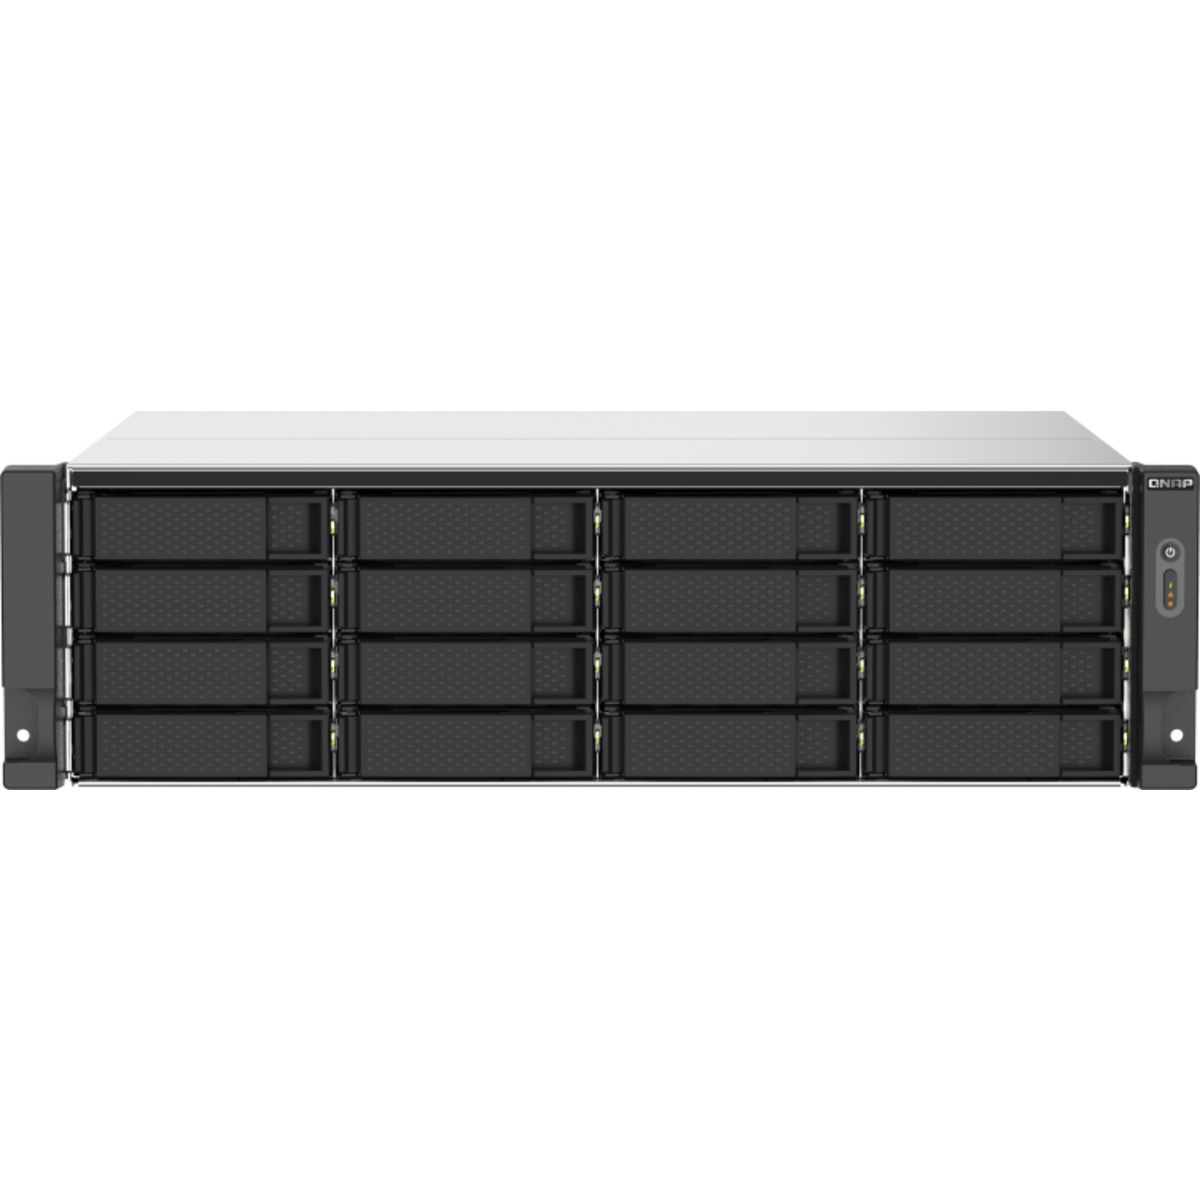 QNAP TS-1673AU-RP RackMount 16-Bay Multimedia / Power User / Business NAS - Network Attached Storage Device Burn-In Tested Configurations - FREE RAM UPGRADE TS-1673AU-RP